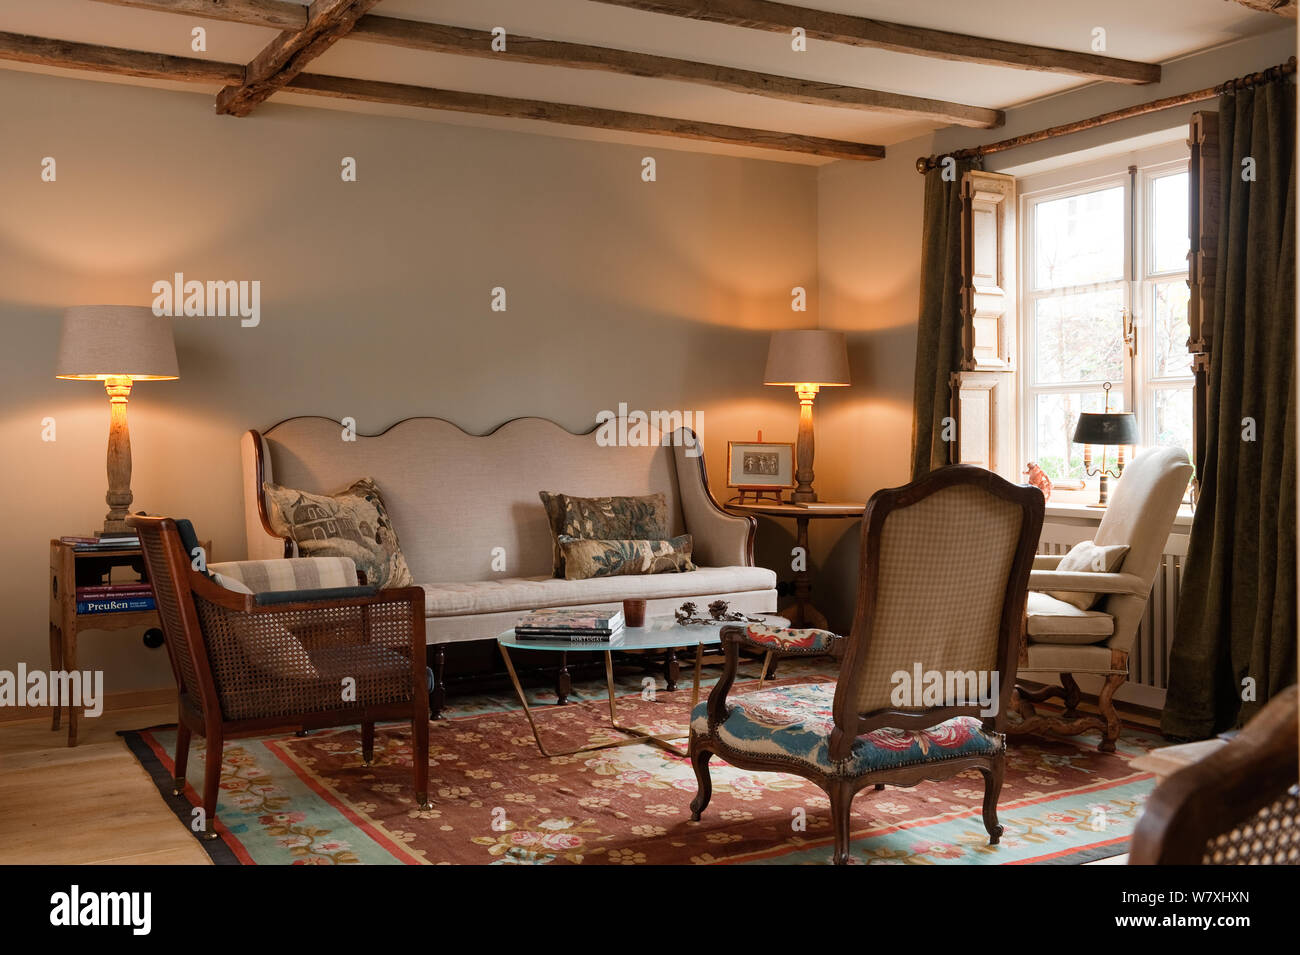 Sofa In Country Style Living Room Stock Photo Alamy